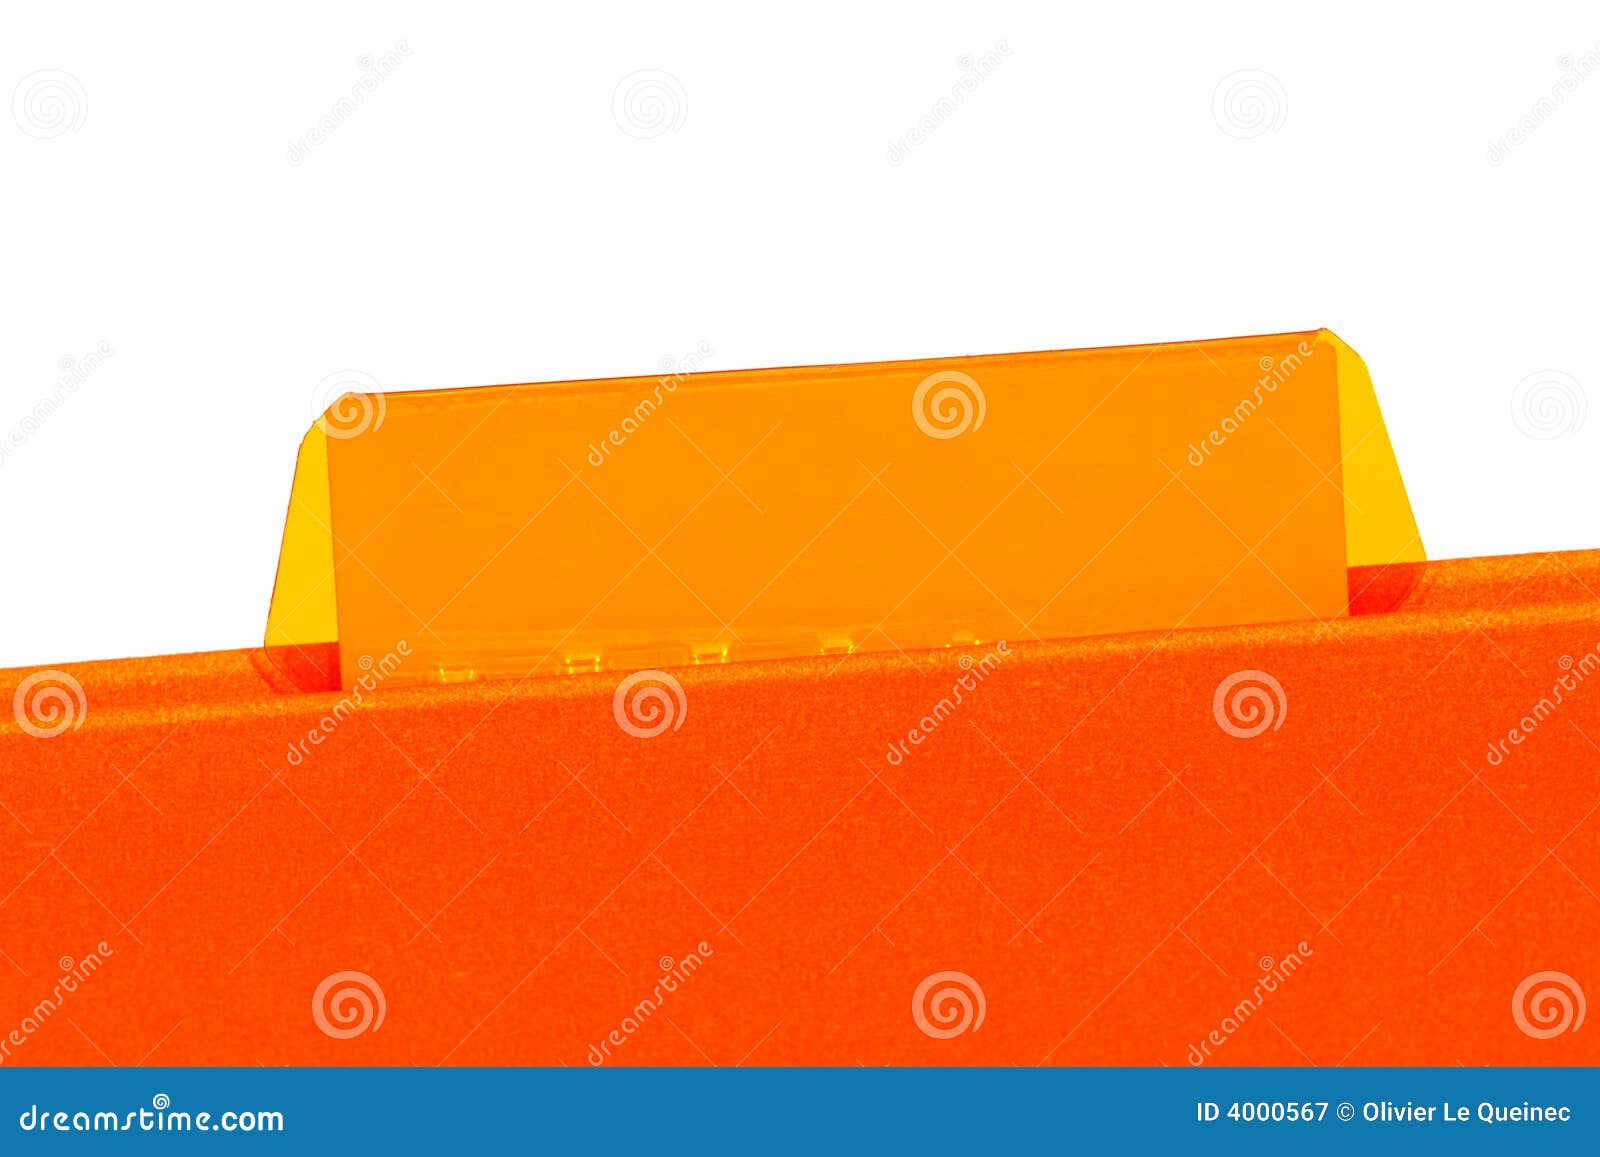 Office File Folder With Empty Blank Tab For Text Stock Image - Image of ...